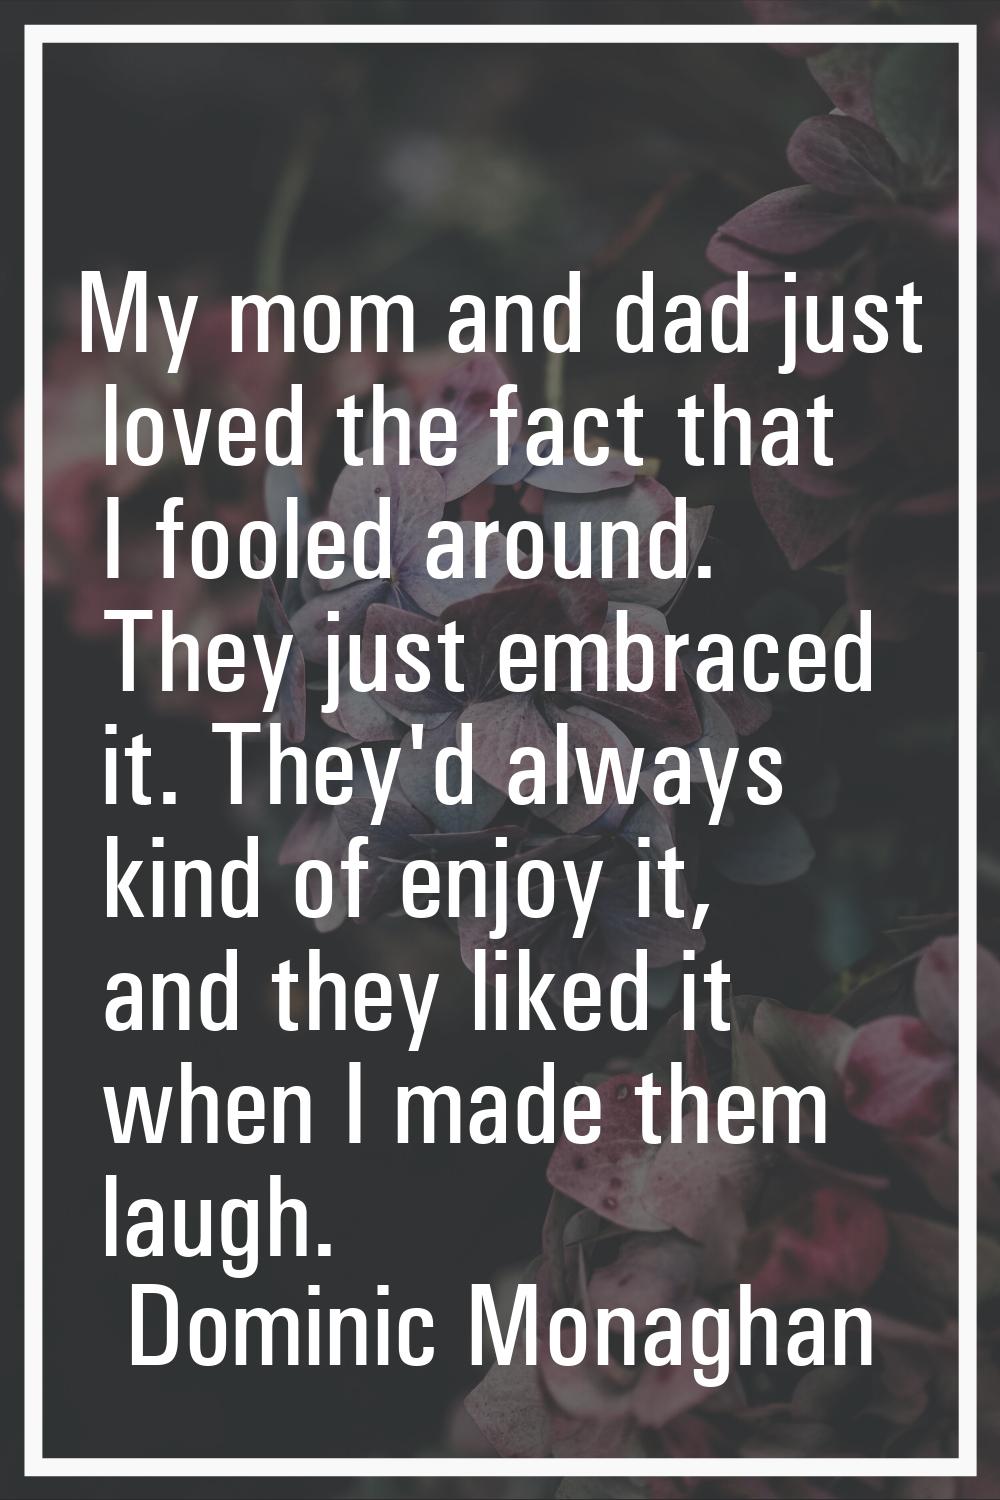 My mom and dad just loved the fact that I fooled around. They just embraced it. They'd always kind 